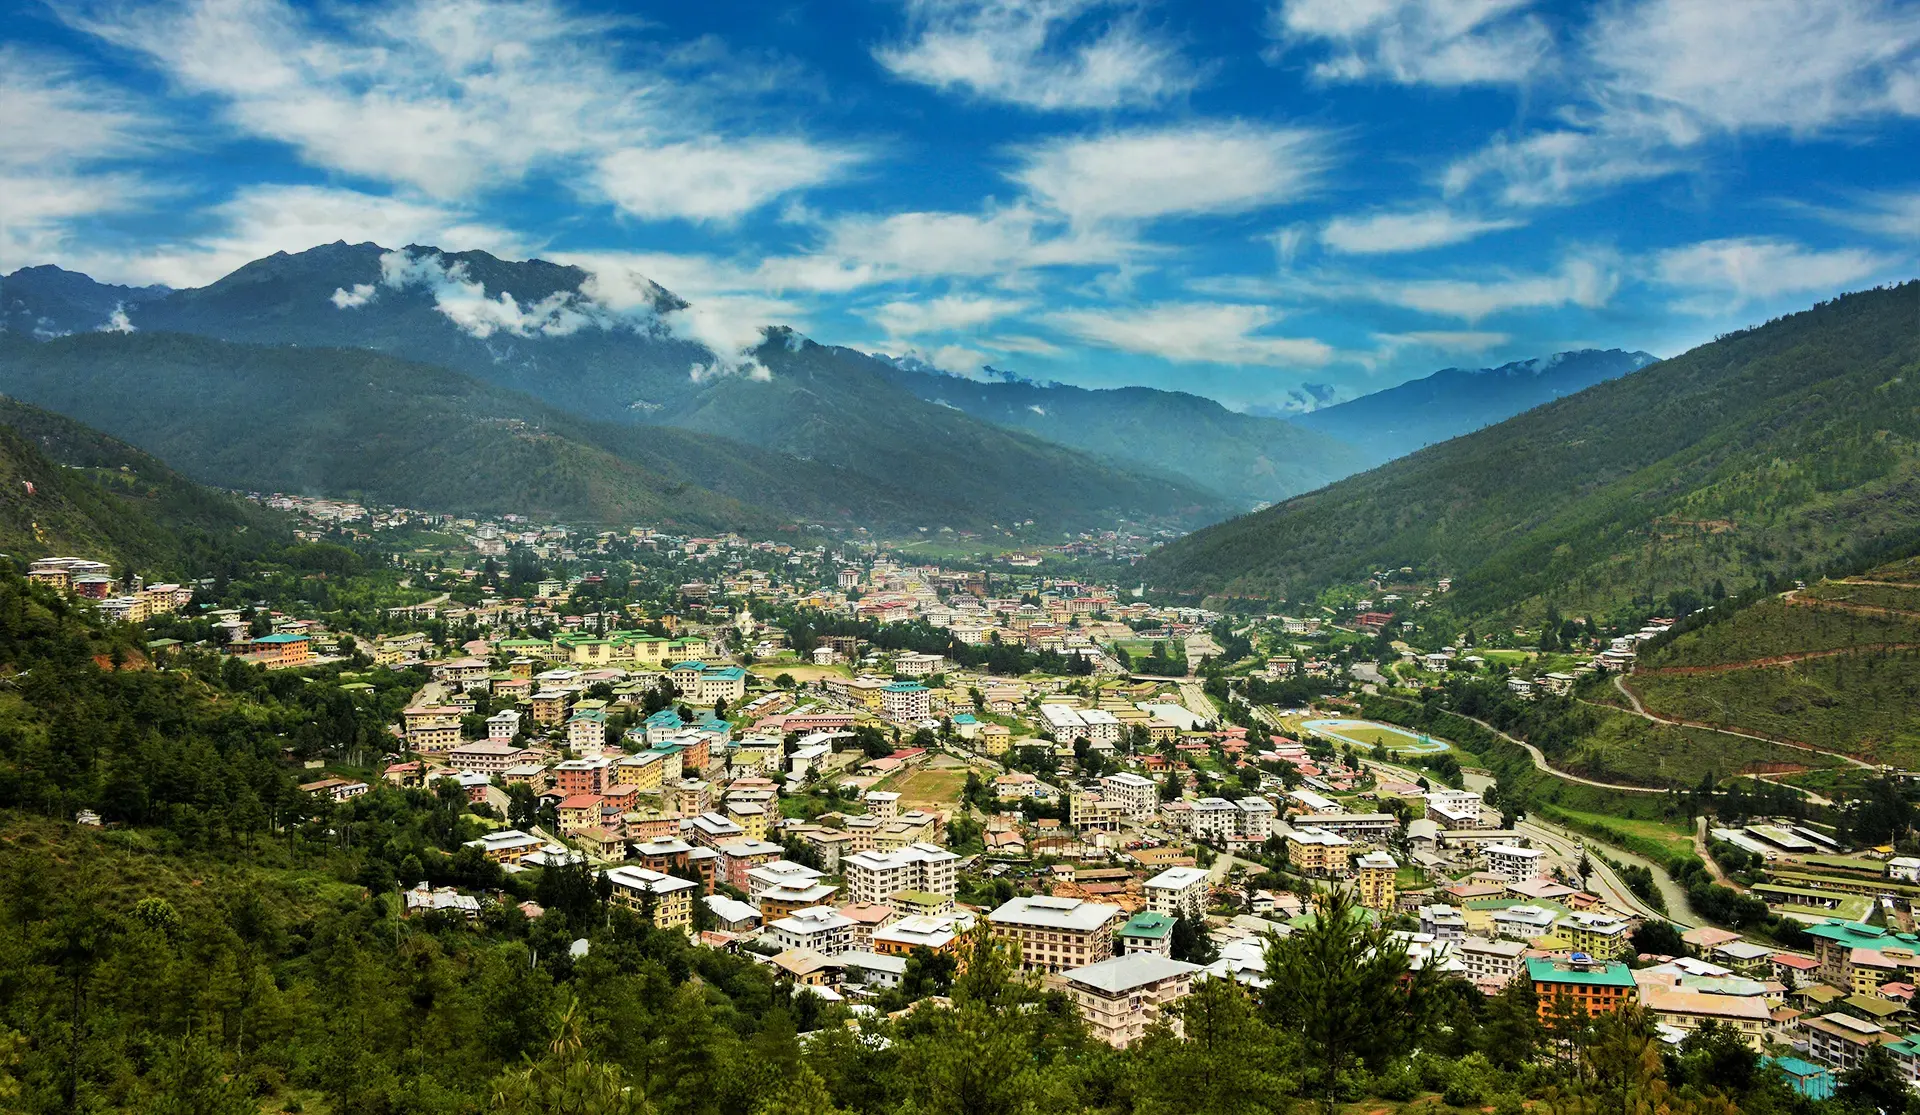 Thimphu, the largest town in Bhutan